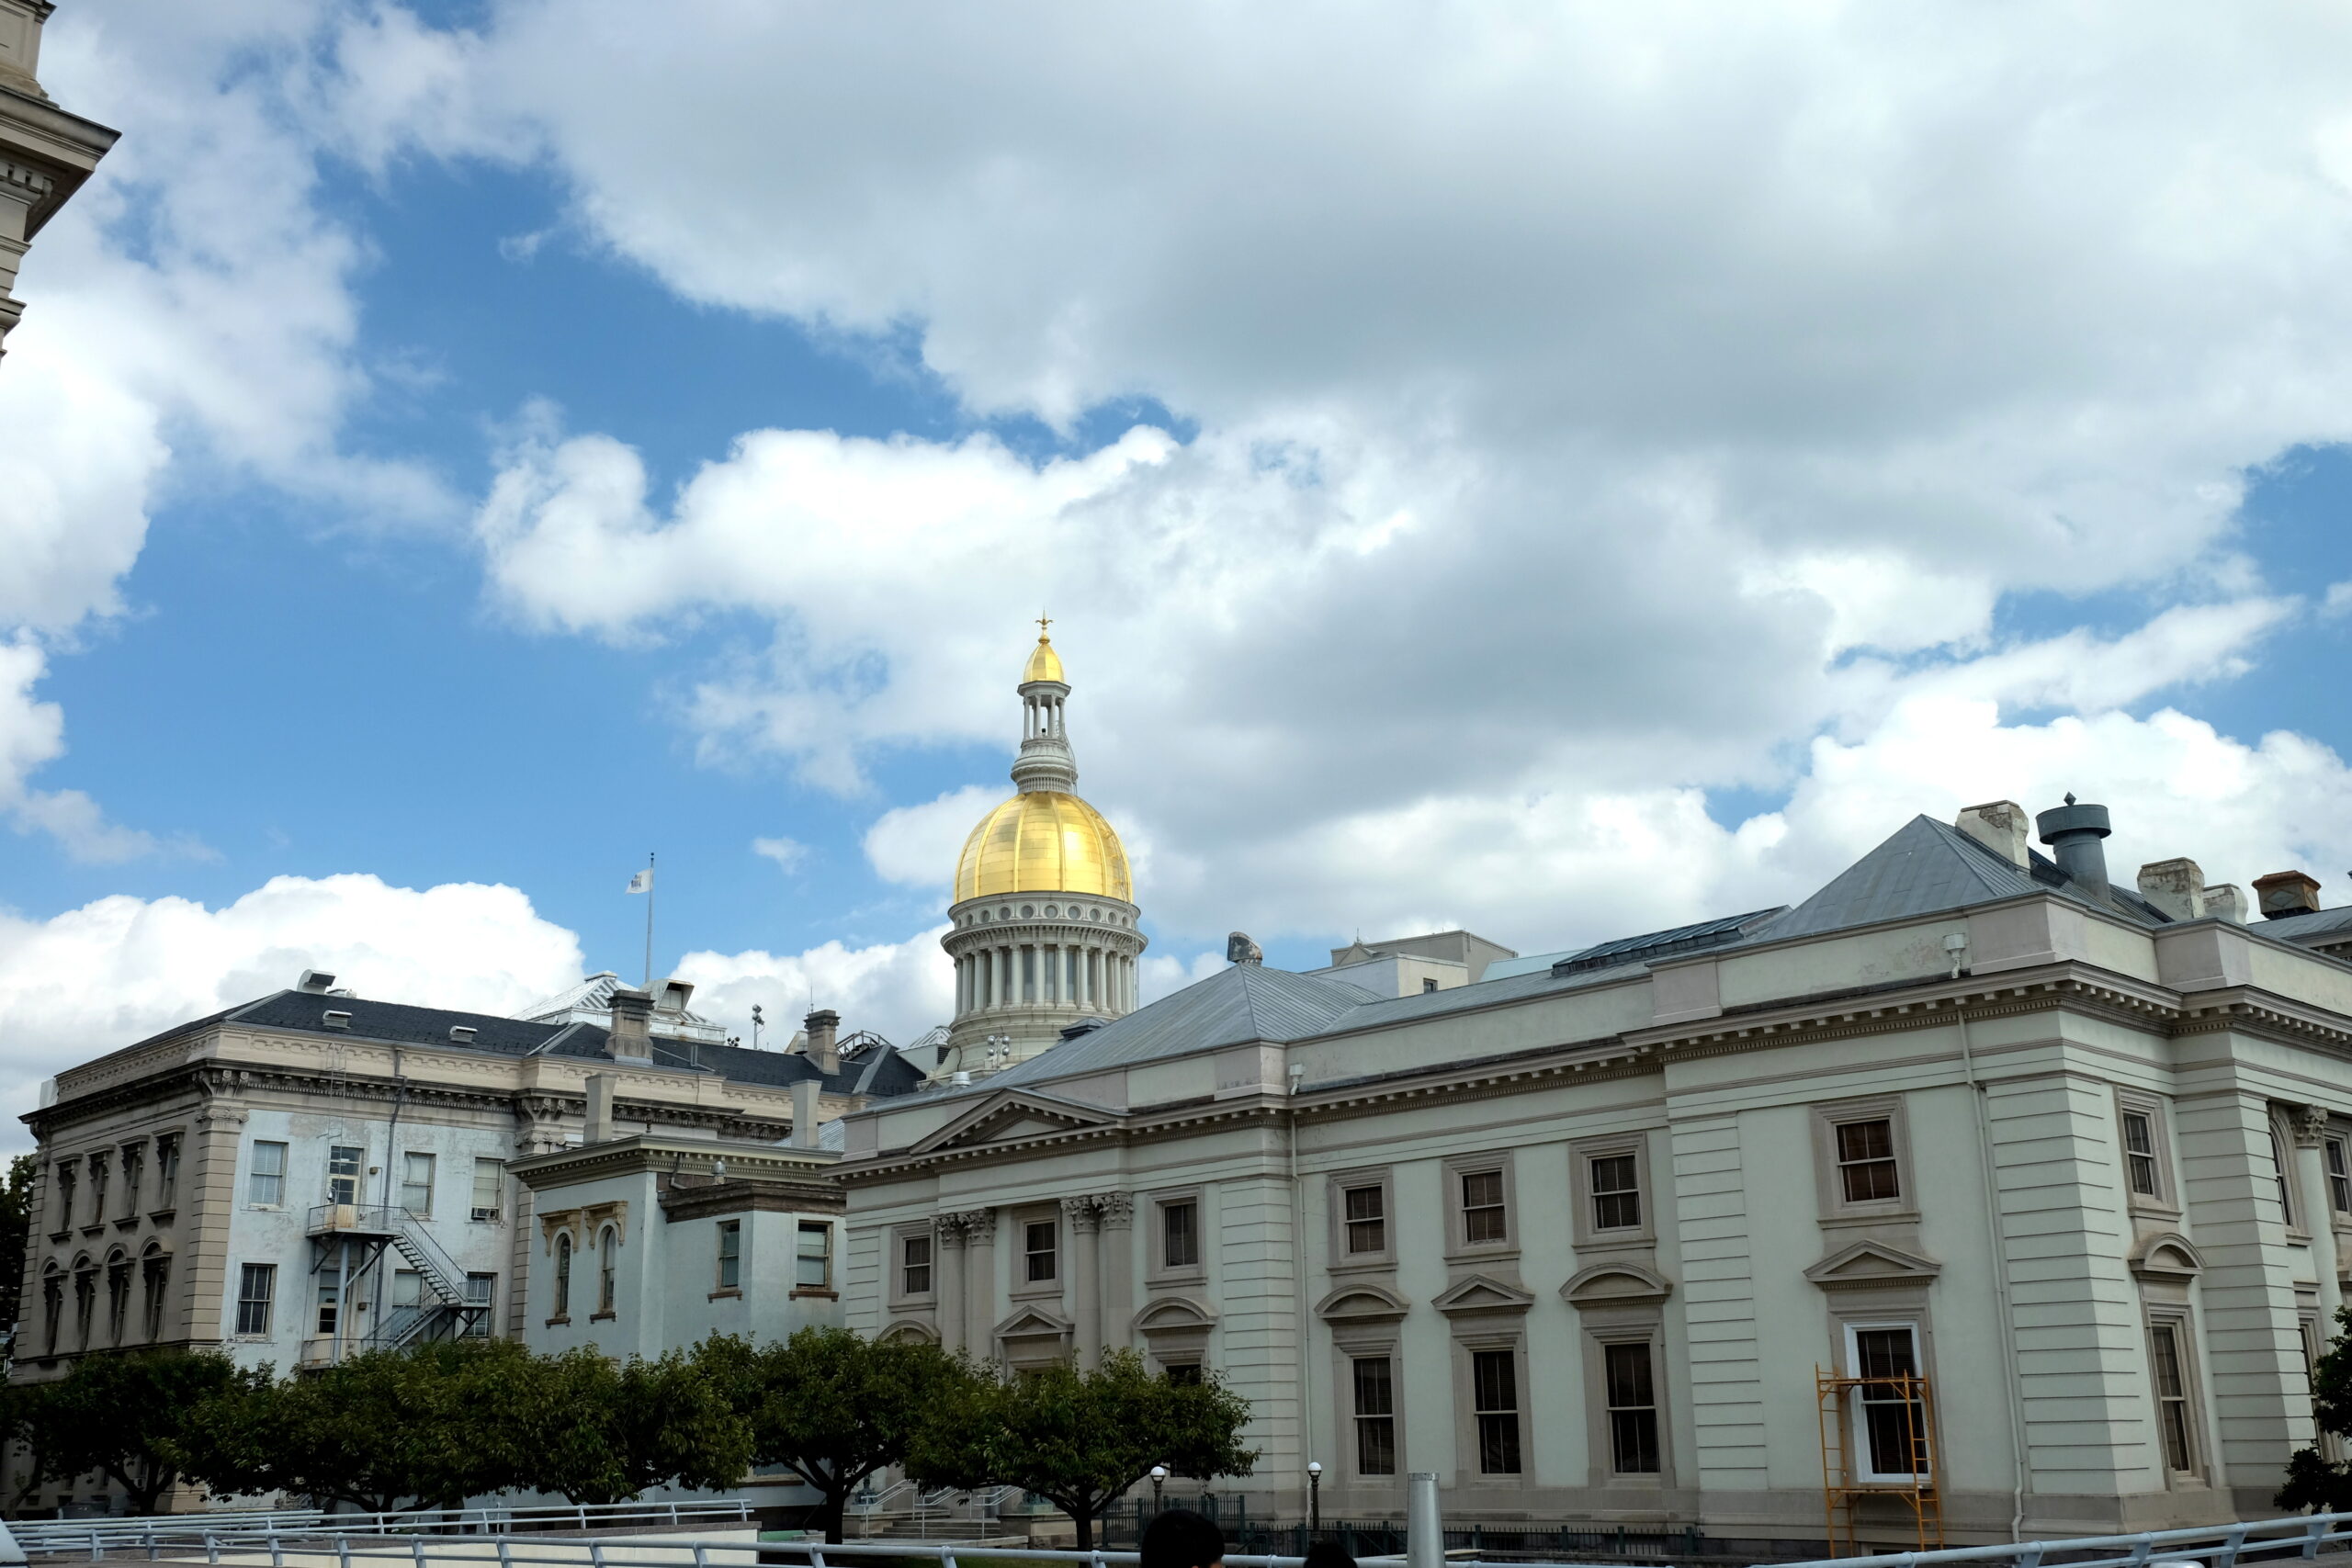 The New Jersey State Capitol building in Trenton, New Jersey.